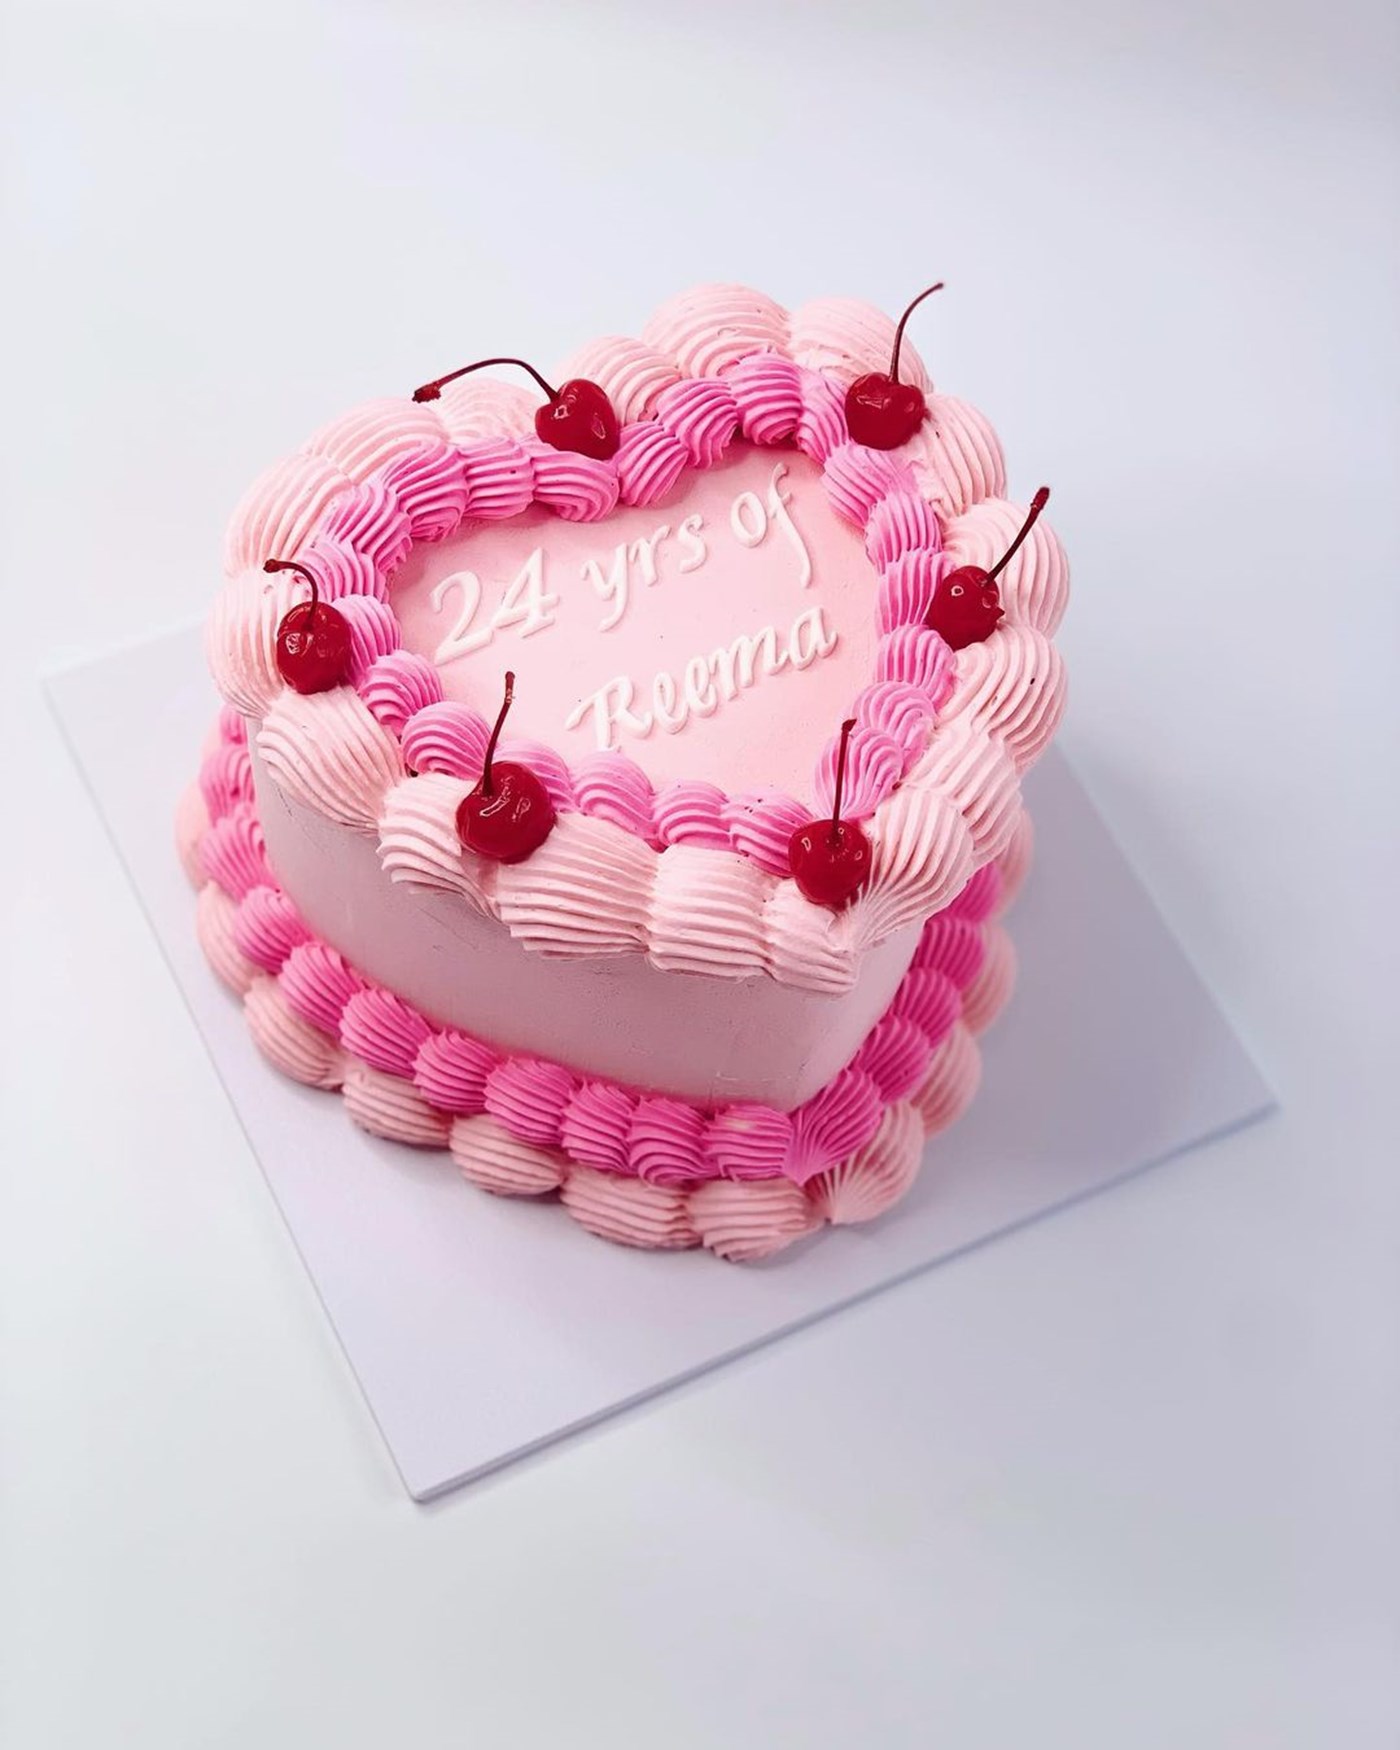 Best Cake Shops Canberra: A love heart cake with piped icing and decorated with cherries in the Marie Antionette style 